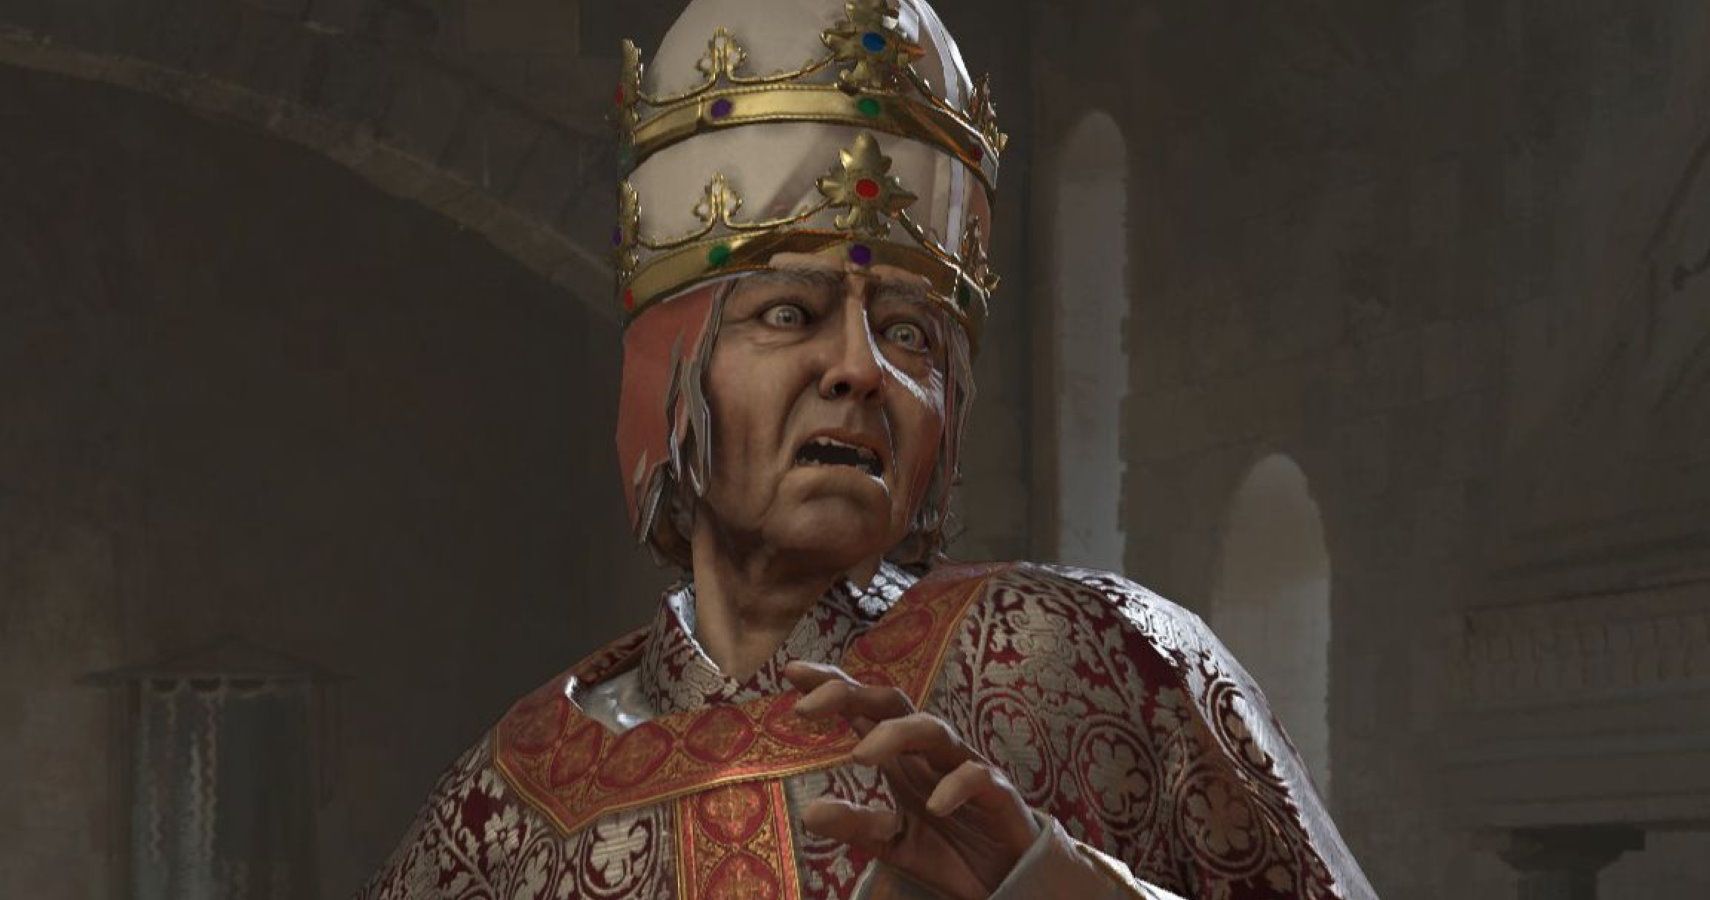 Crusader Kings 3 will 'probably' happen, says outgoing Paradox CEO